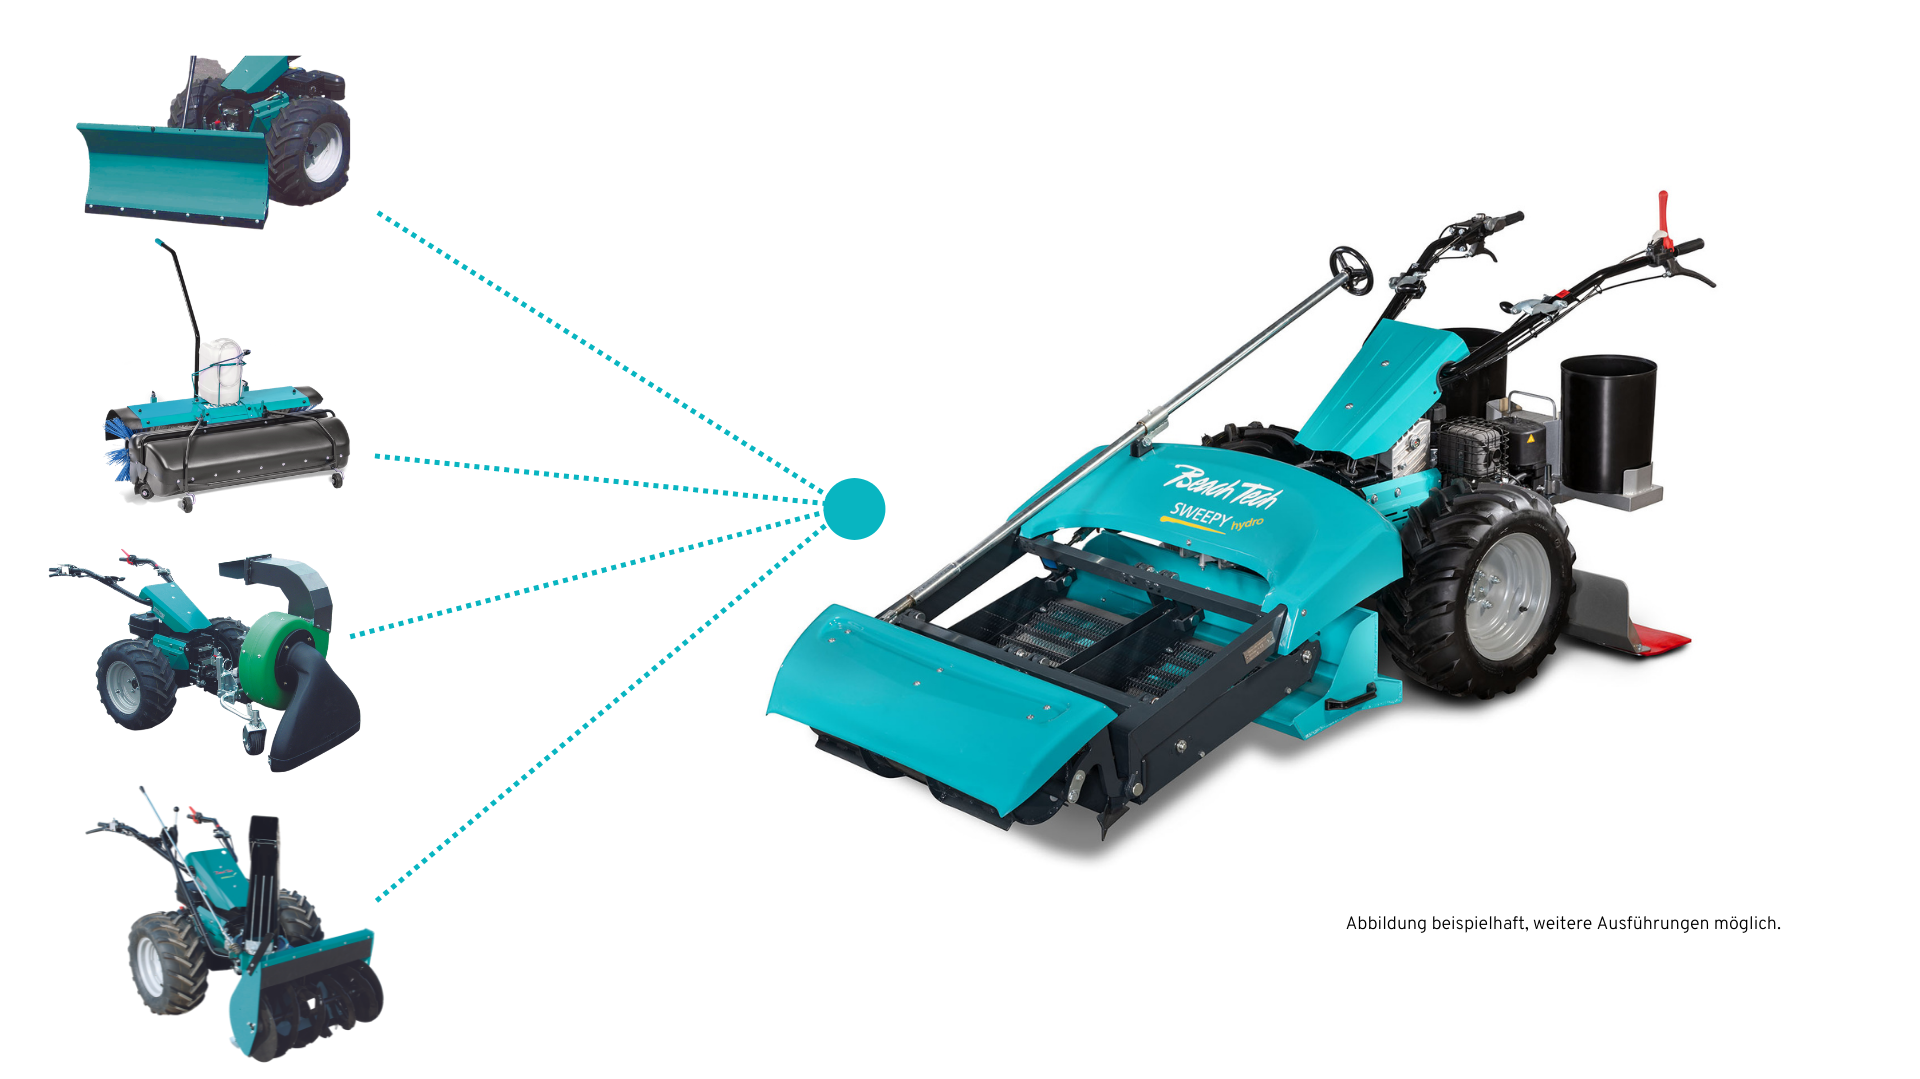 In just a few easy steps you can turn the BeachTech Sweepy into a snow remover, street sweeper, leaf vacuum or snow tiller. Further attachments are available